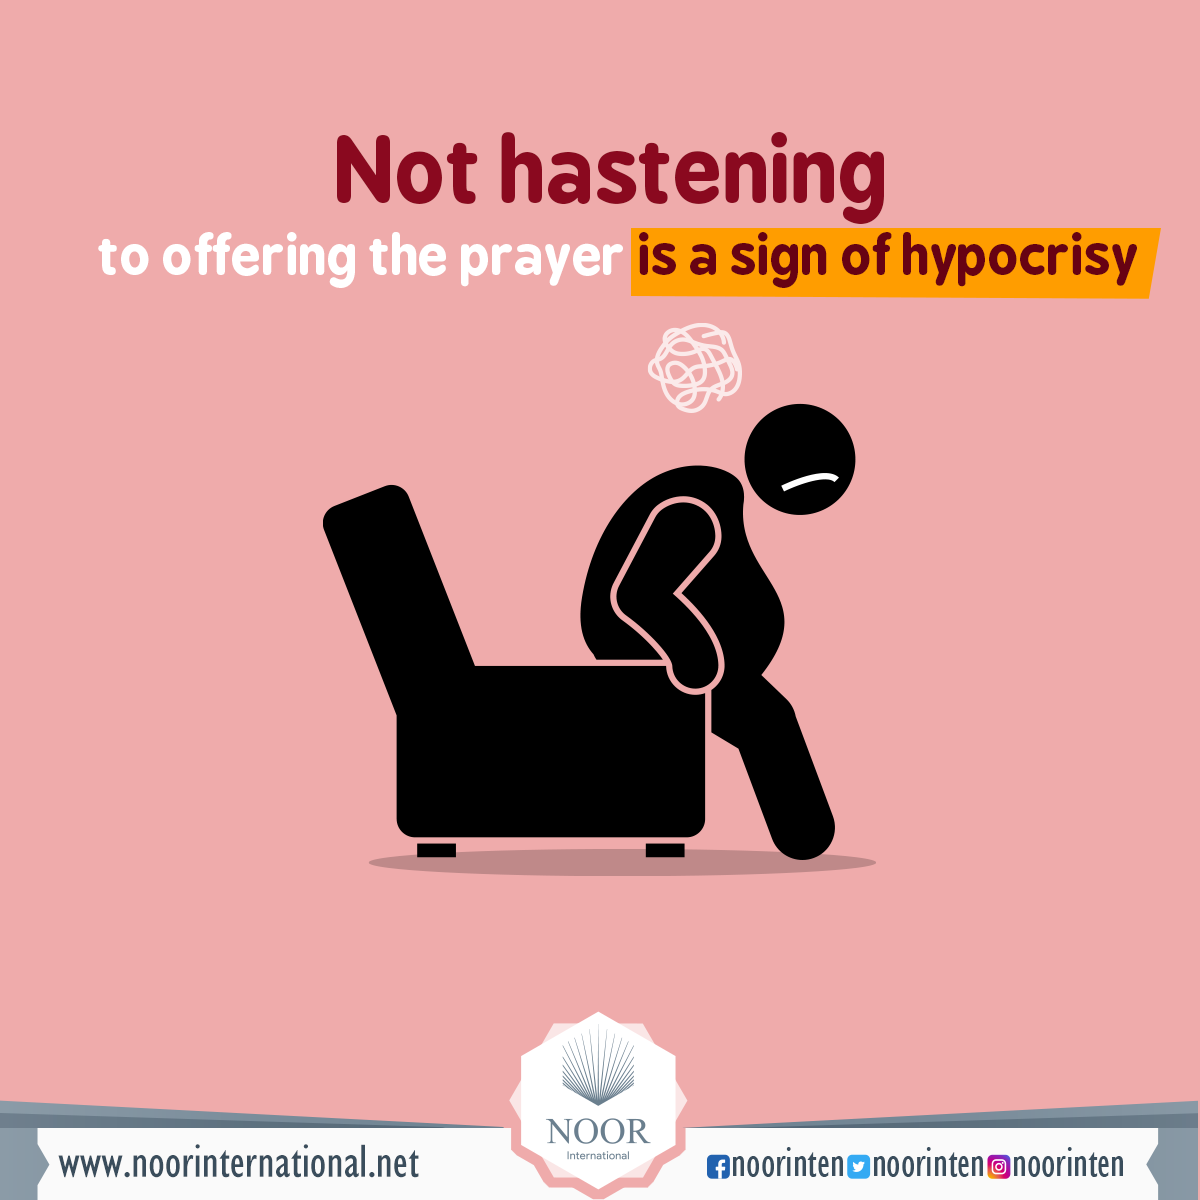 Not hastening to offering the prayer is a sign of hypocrisy